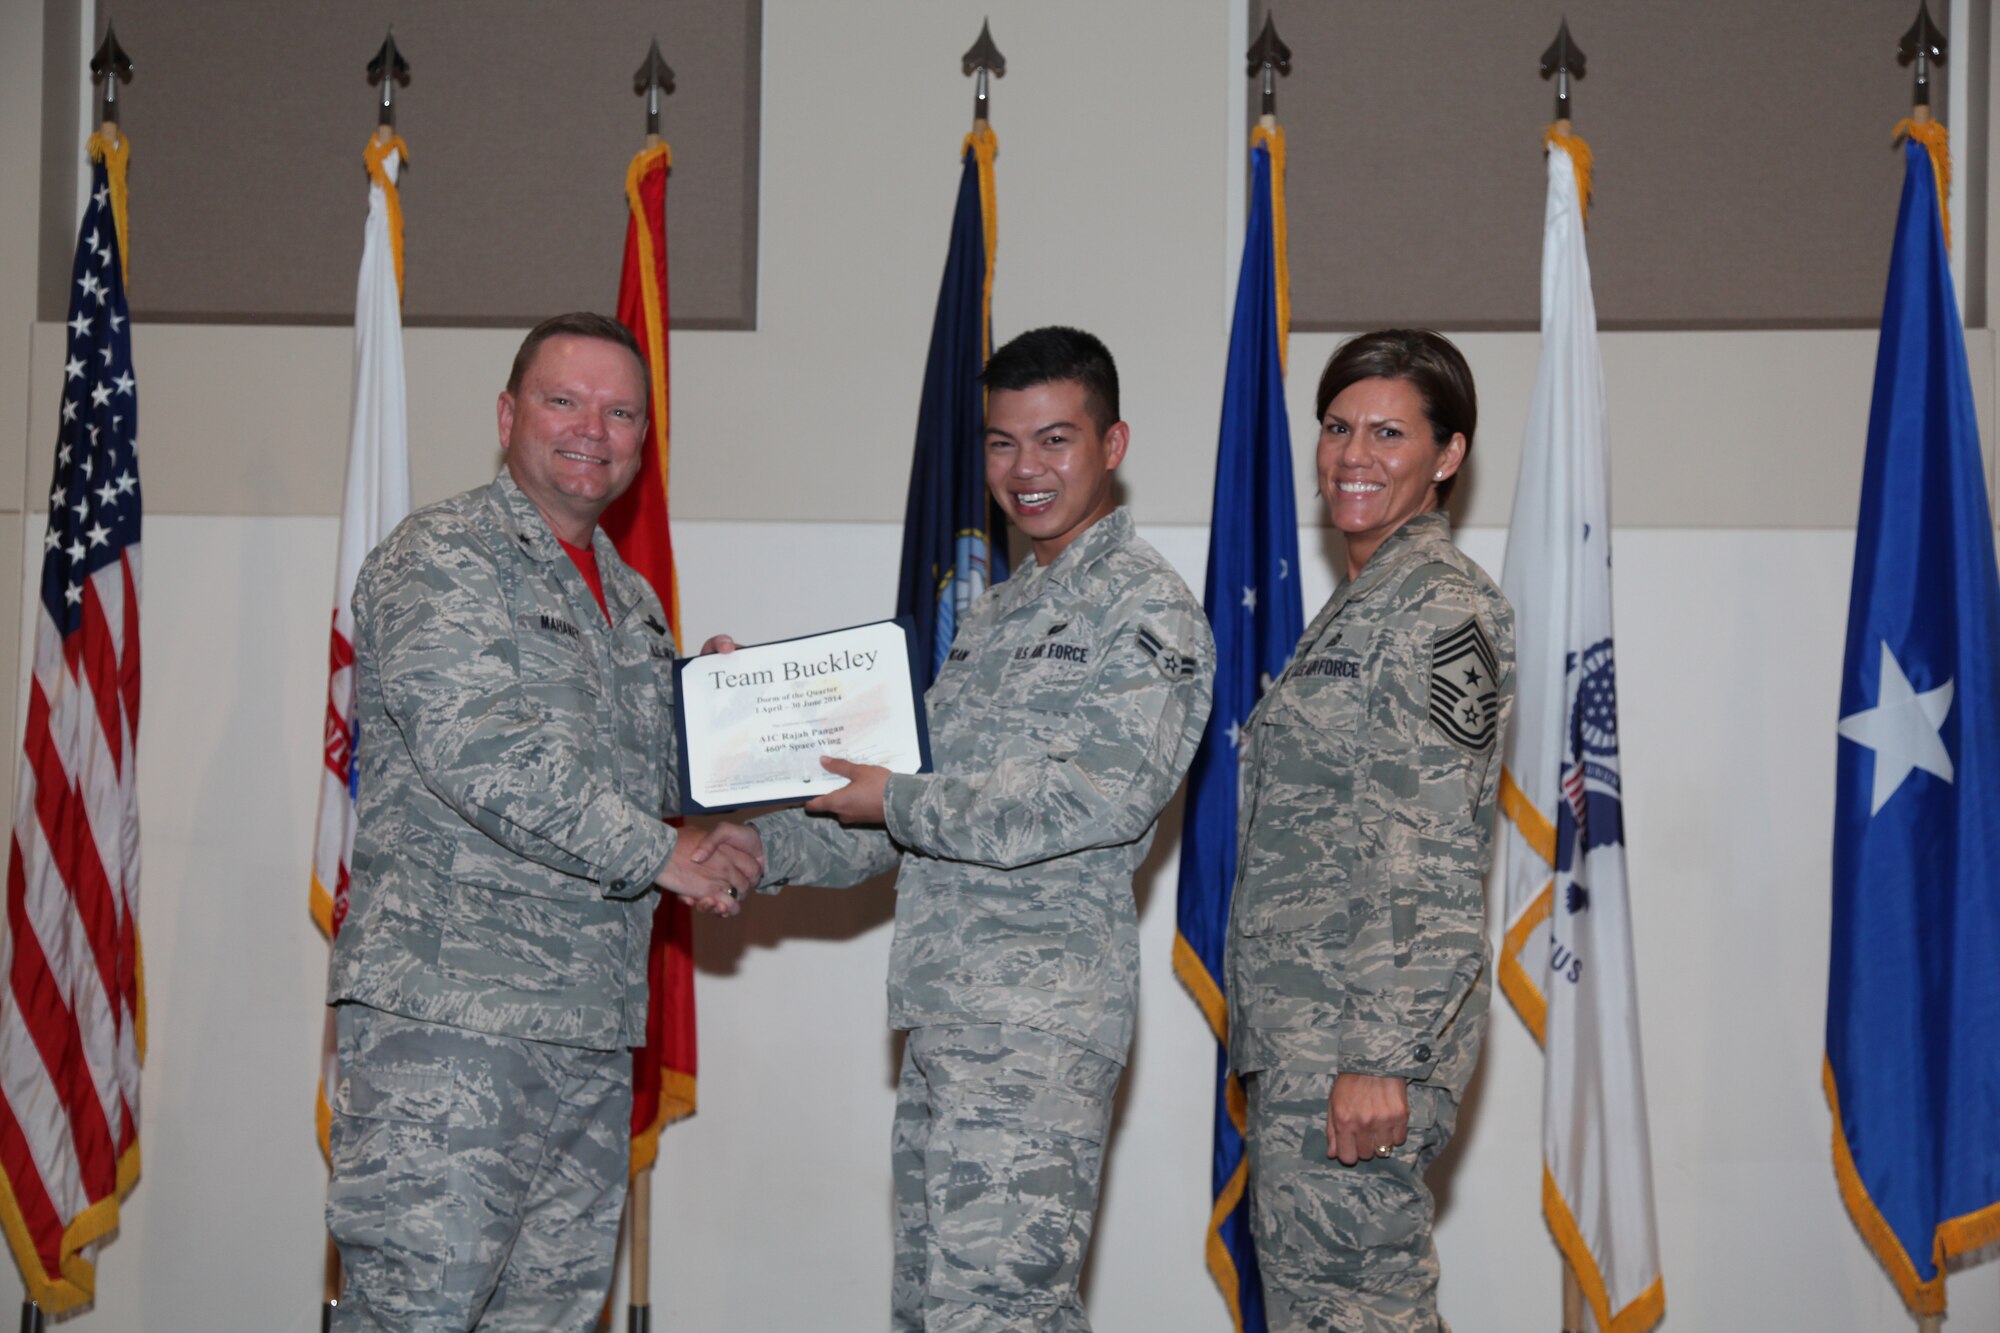 Brig. Gen. Samuel "Bo" Mahaney, Air Reserve Personnel Center commander, and Chief Master Sgt. Ruthe Flores, ARPC command chief, present the Dormitory award to Airman 1st Class Rajah Pangan, 460th Space Wing, during the Team Buckley quarterly awards ceremony Aug. 8 on Buckley Air Force Base, Colo. (U.S. Air Force photo/Quinn Jacobson)